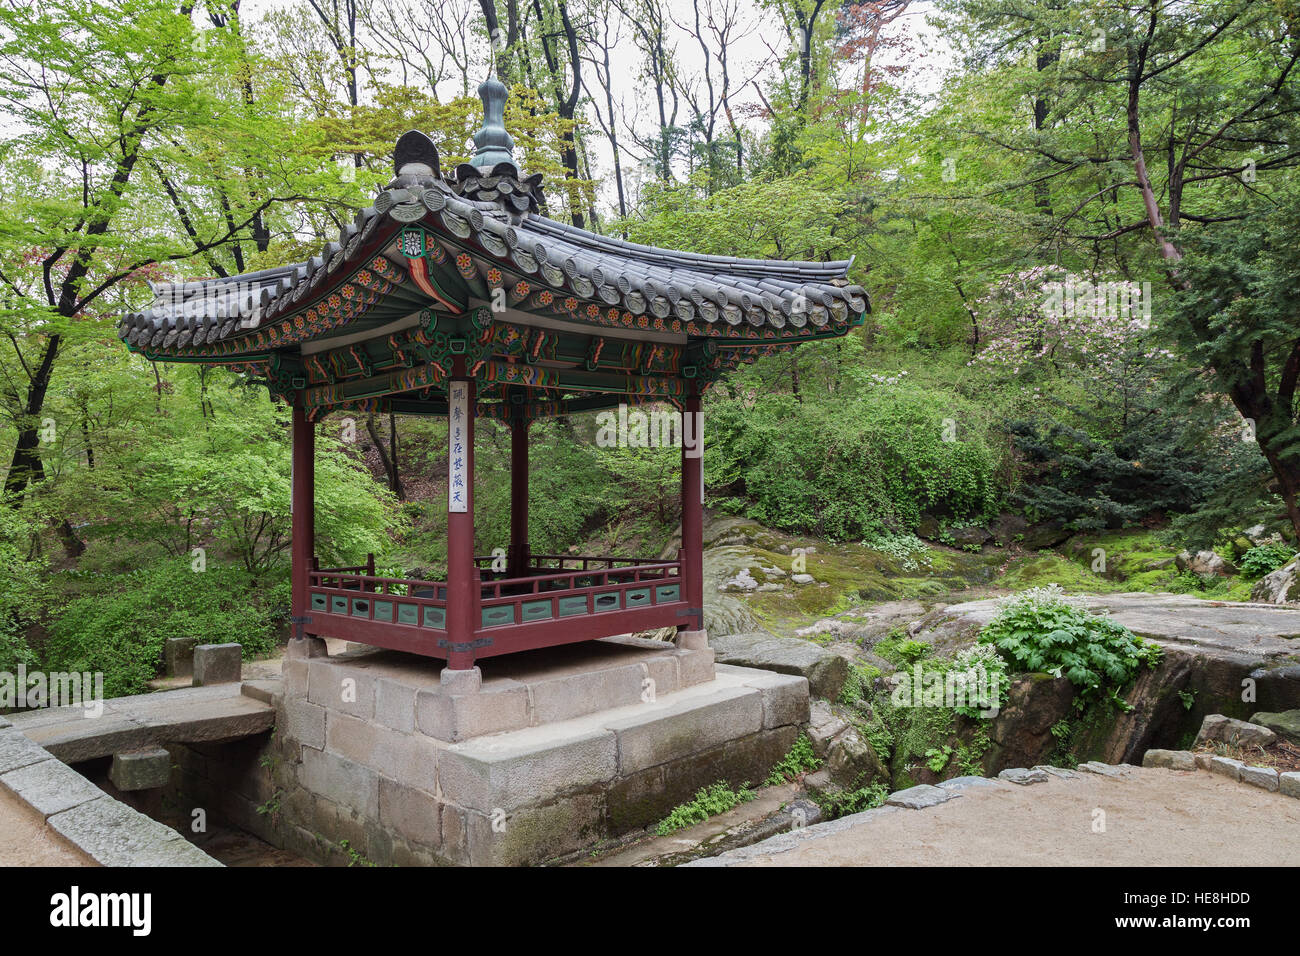 Ornate pavilion and verdant nature at Huwon (Secret Garden) at the Changdeokgung Palace in Seoul, South Korea. Stock Photo